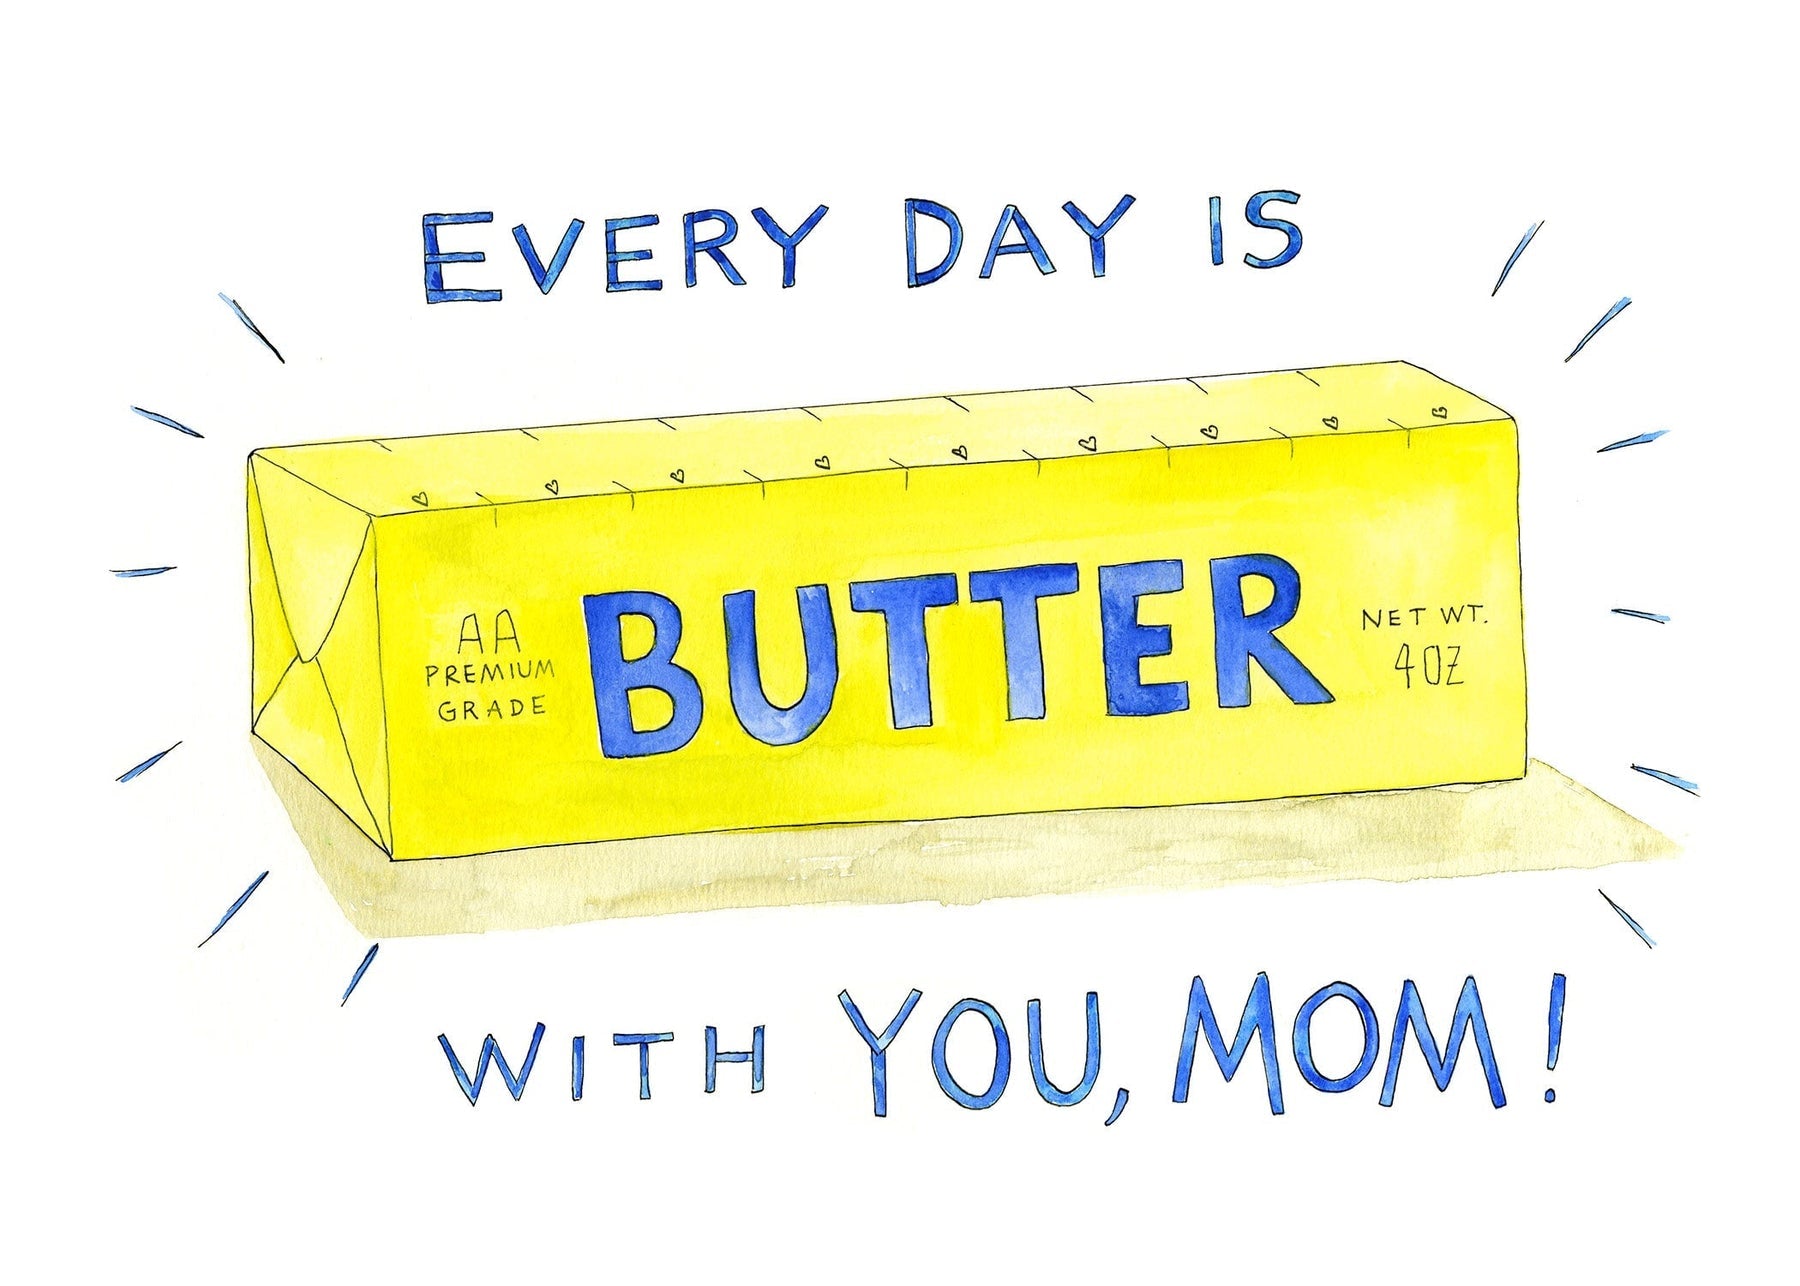 Every Day is Butter With You, Mom Greeting Card + Envelope